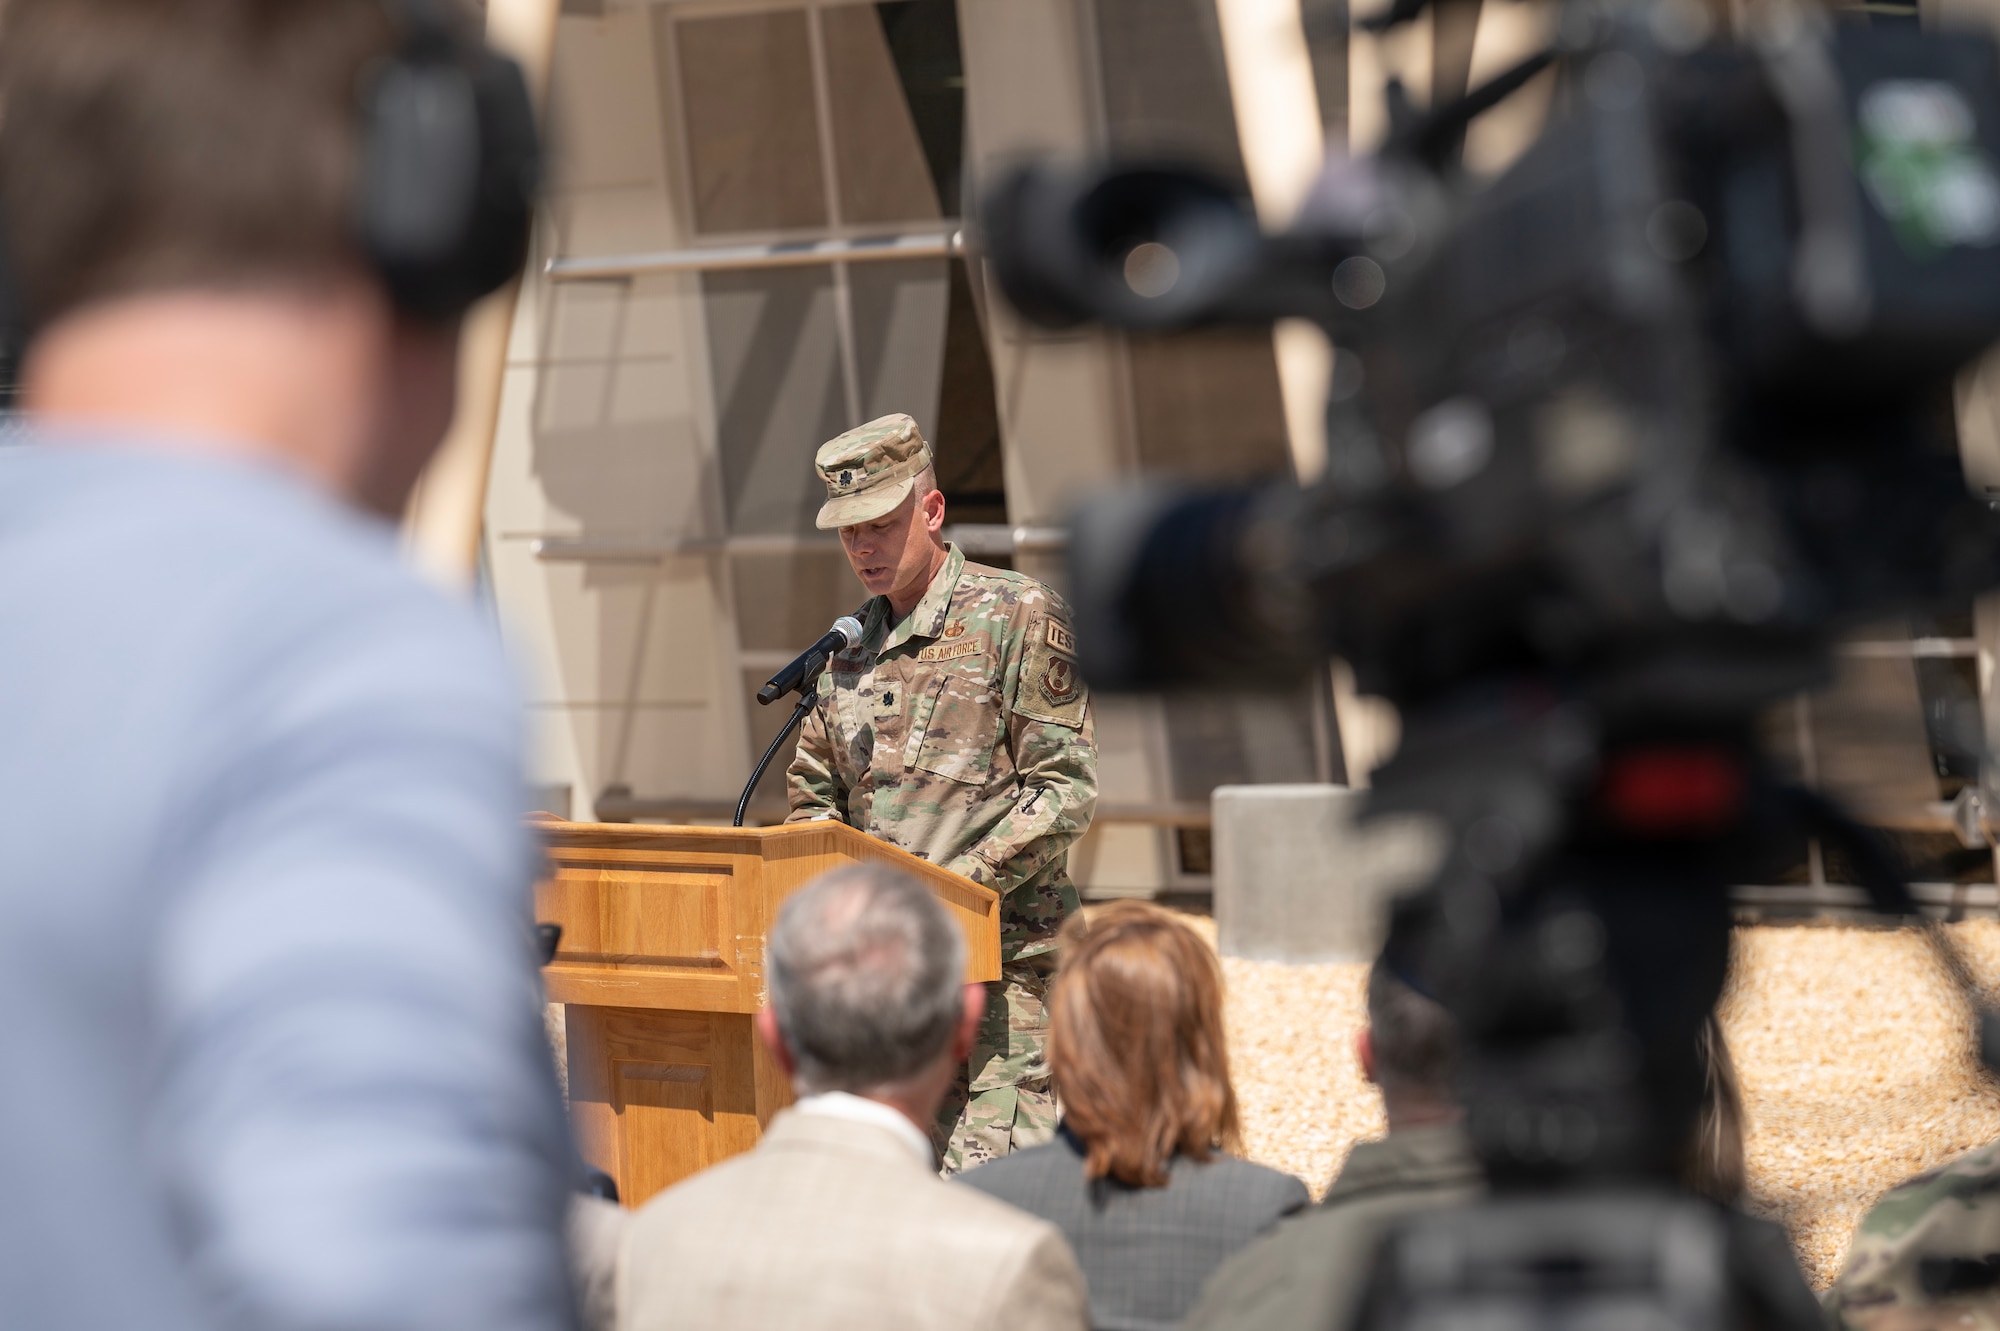 Lt. Col. James Petersen, 445 Test Squadron commander, gives a speech at the Digital Test and Training Range Facility Ribbon-Cutting Ceremony at Edwards Air Force Base, California, May 8, 2023. The mission 445 TS will begin performing at the DTTR will revolutionize test and training across the electromagnetic spectrum for multi-domain, multi-platform, system-of-systems scenarios. (U.S. Air Force Photo/Tech. Sgt. Robert Cloys)